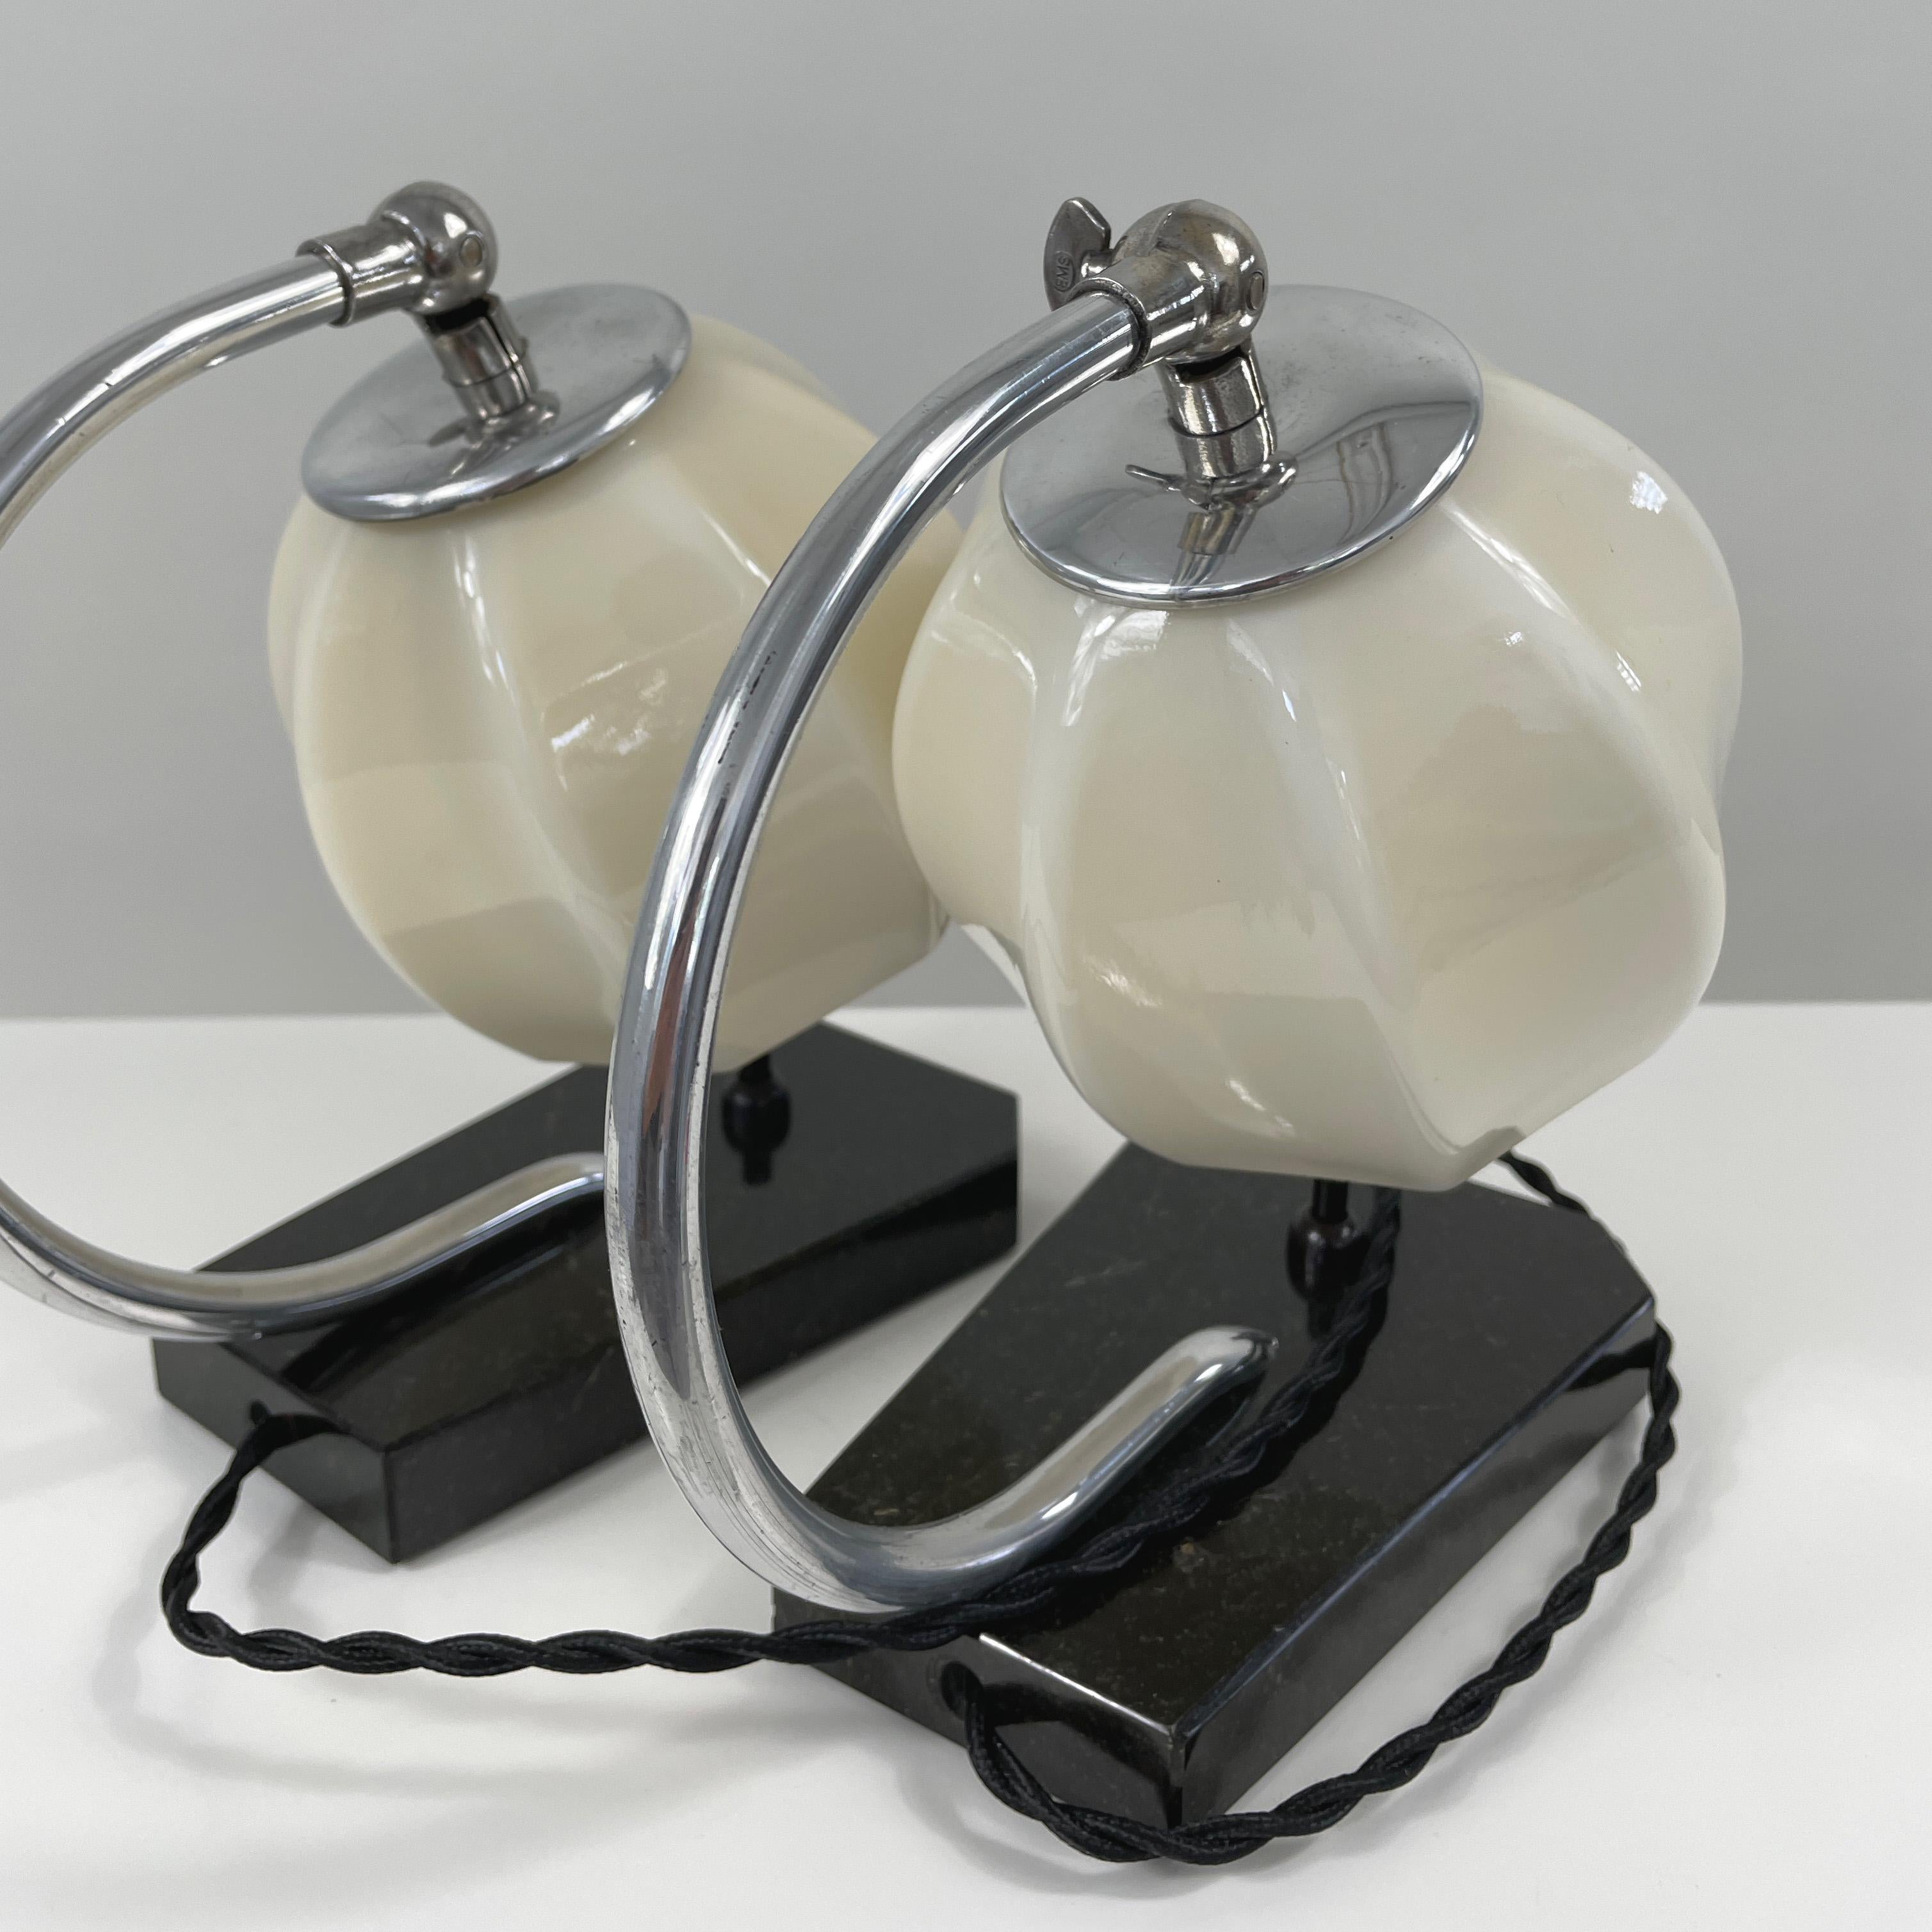 German Art Deco Opaline Glass, Marble and Aluminum Table Lamps, 1930s For Sale 4